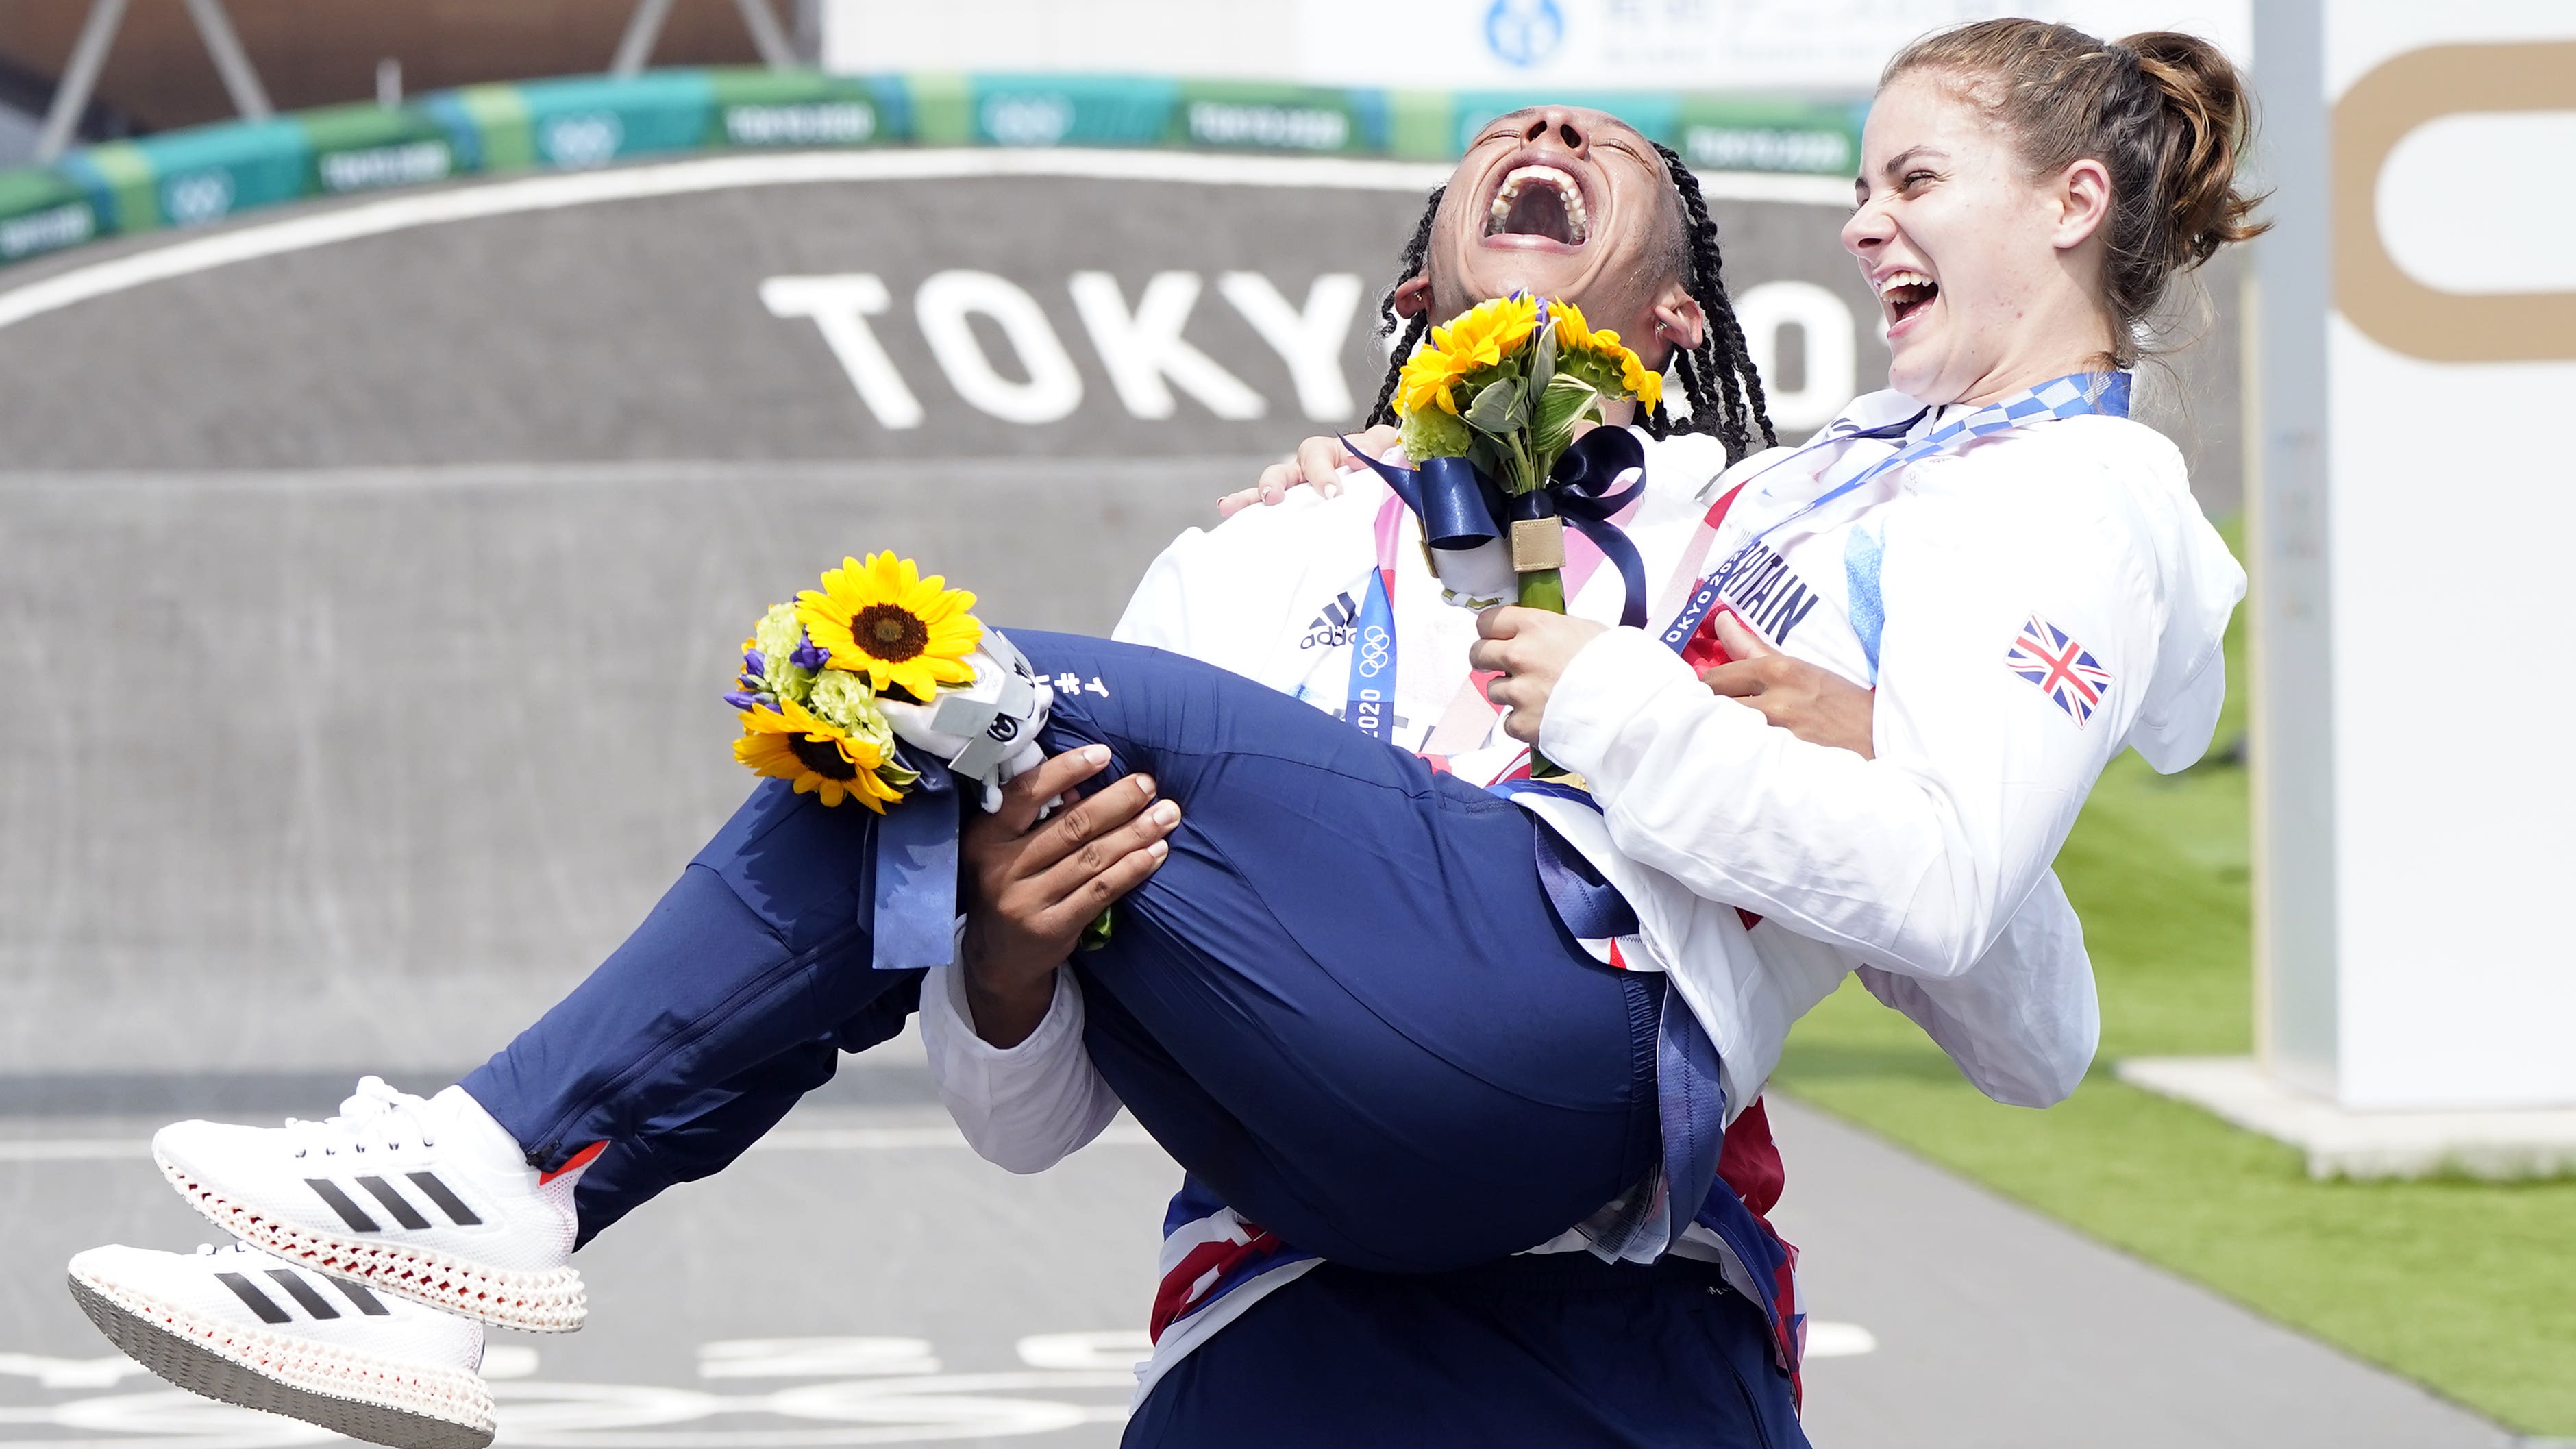 Beth Shriever and Kye Whyte create history with BMX medals ...